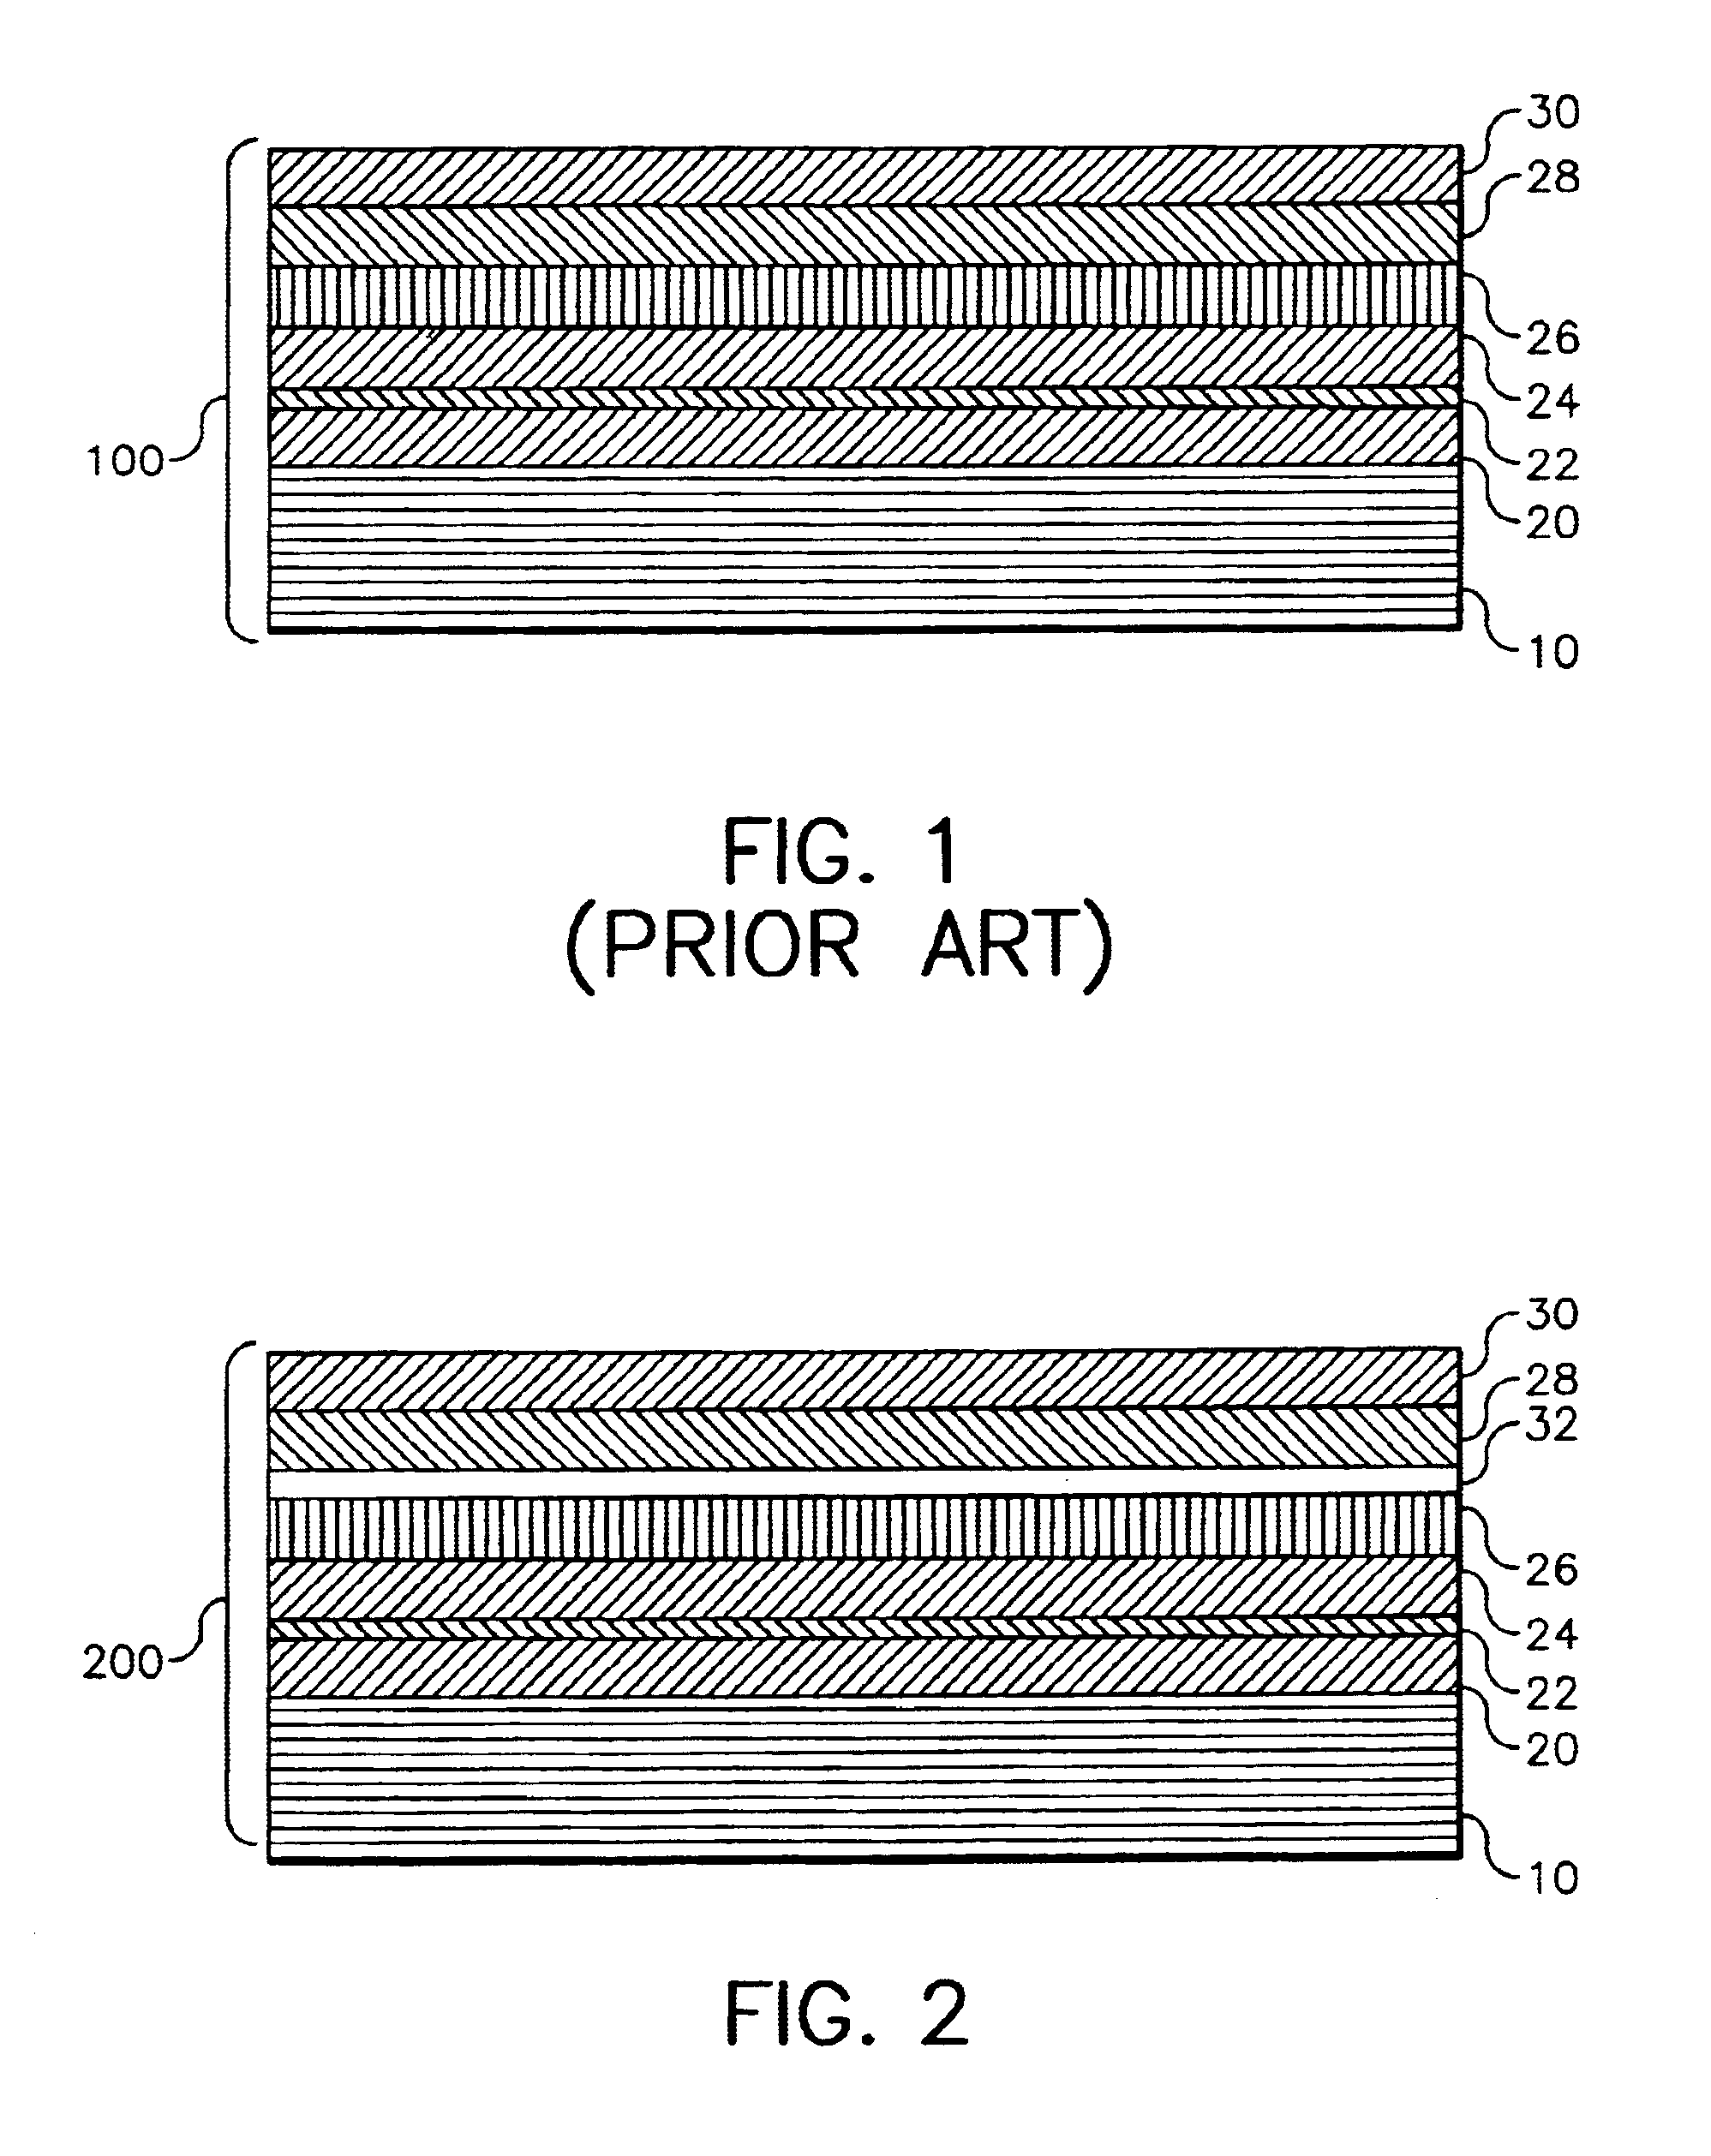 Providing an emission-protecting layer in an OLED device